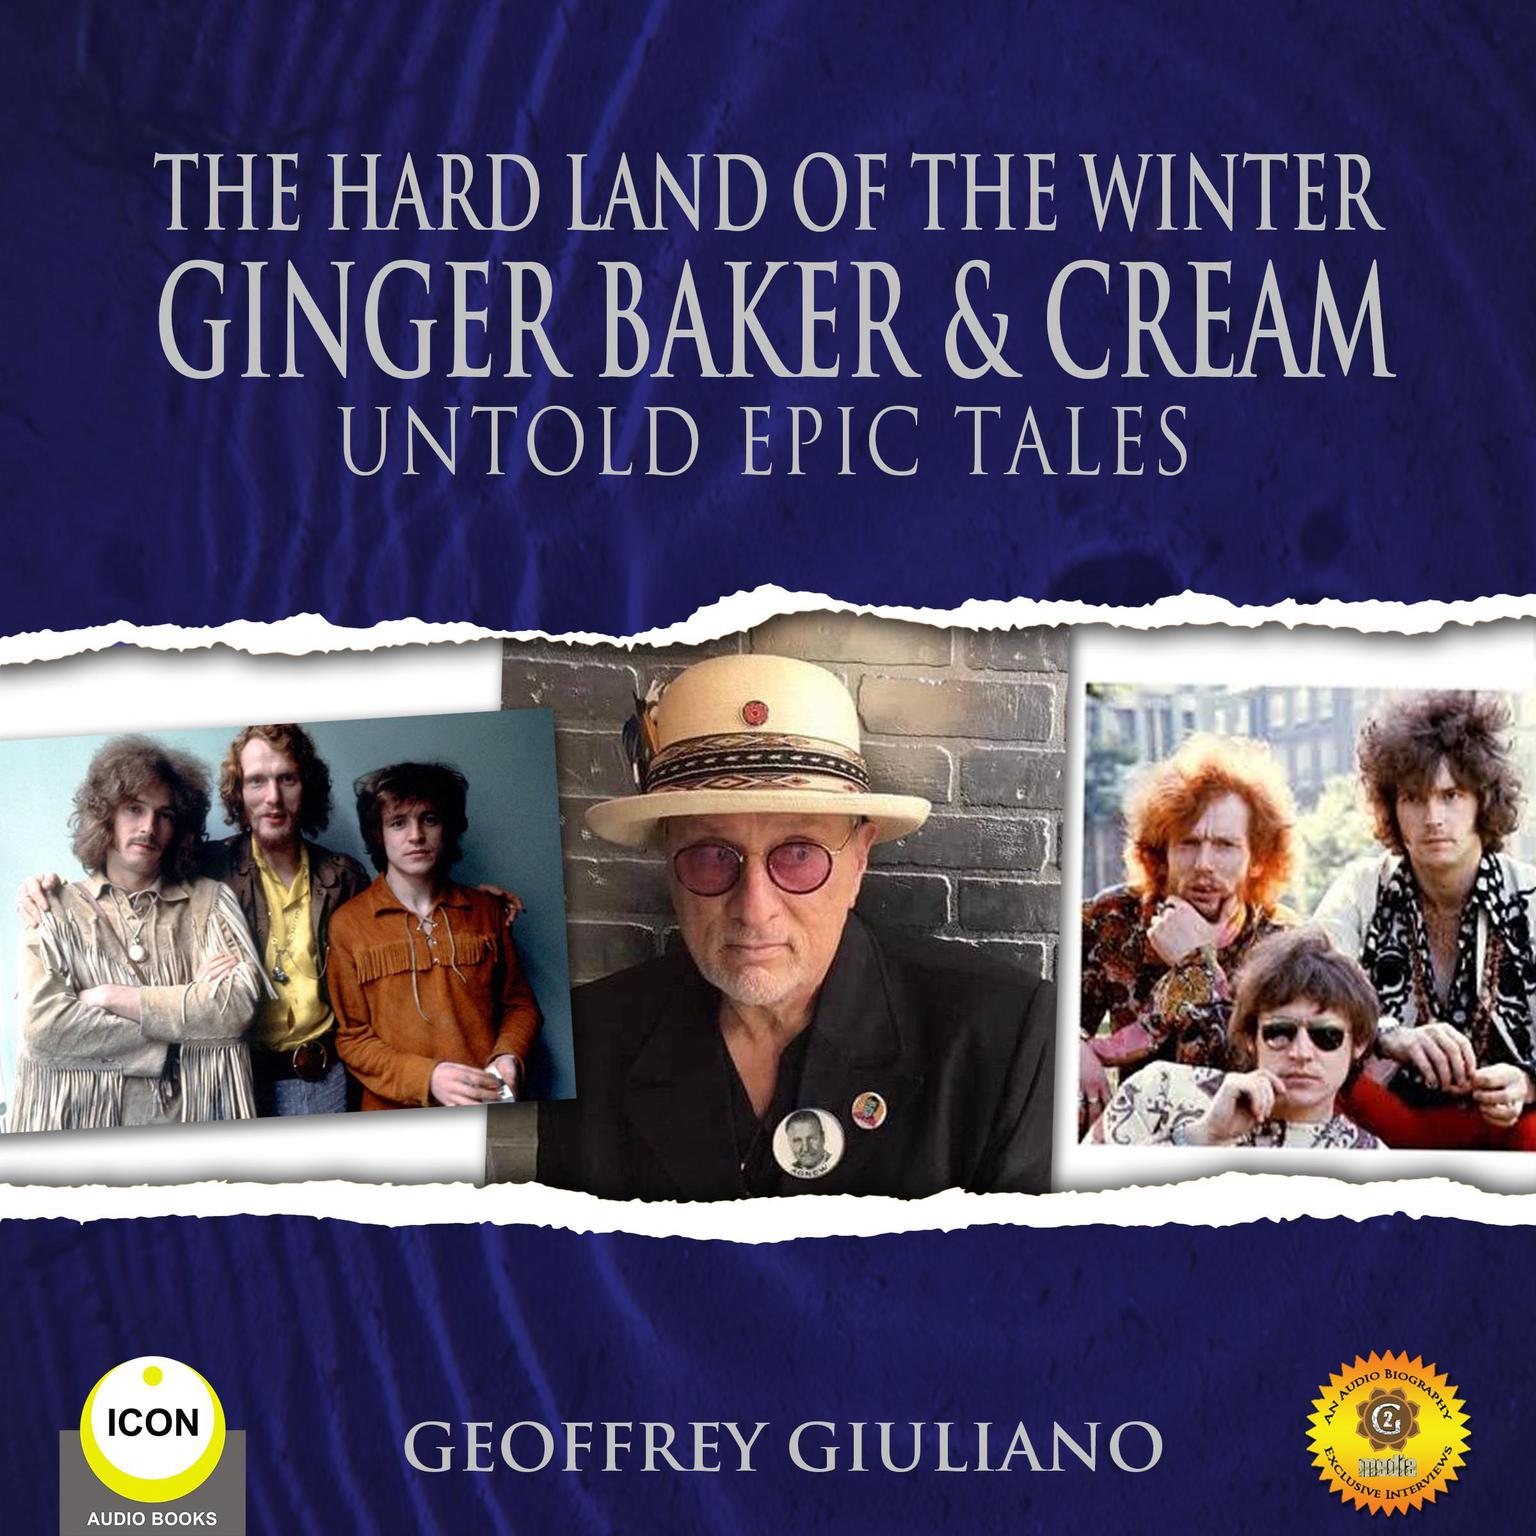 The Hard Land of The Winter Ginger Baker & Cream - Untold Epic Tales Audiobook, by Geoffrey Giuliano